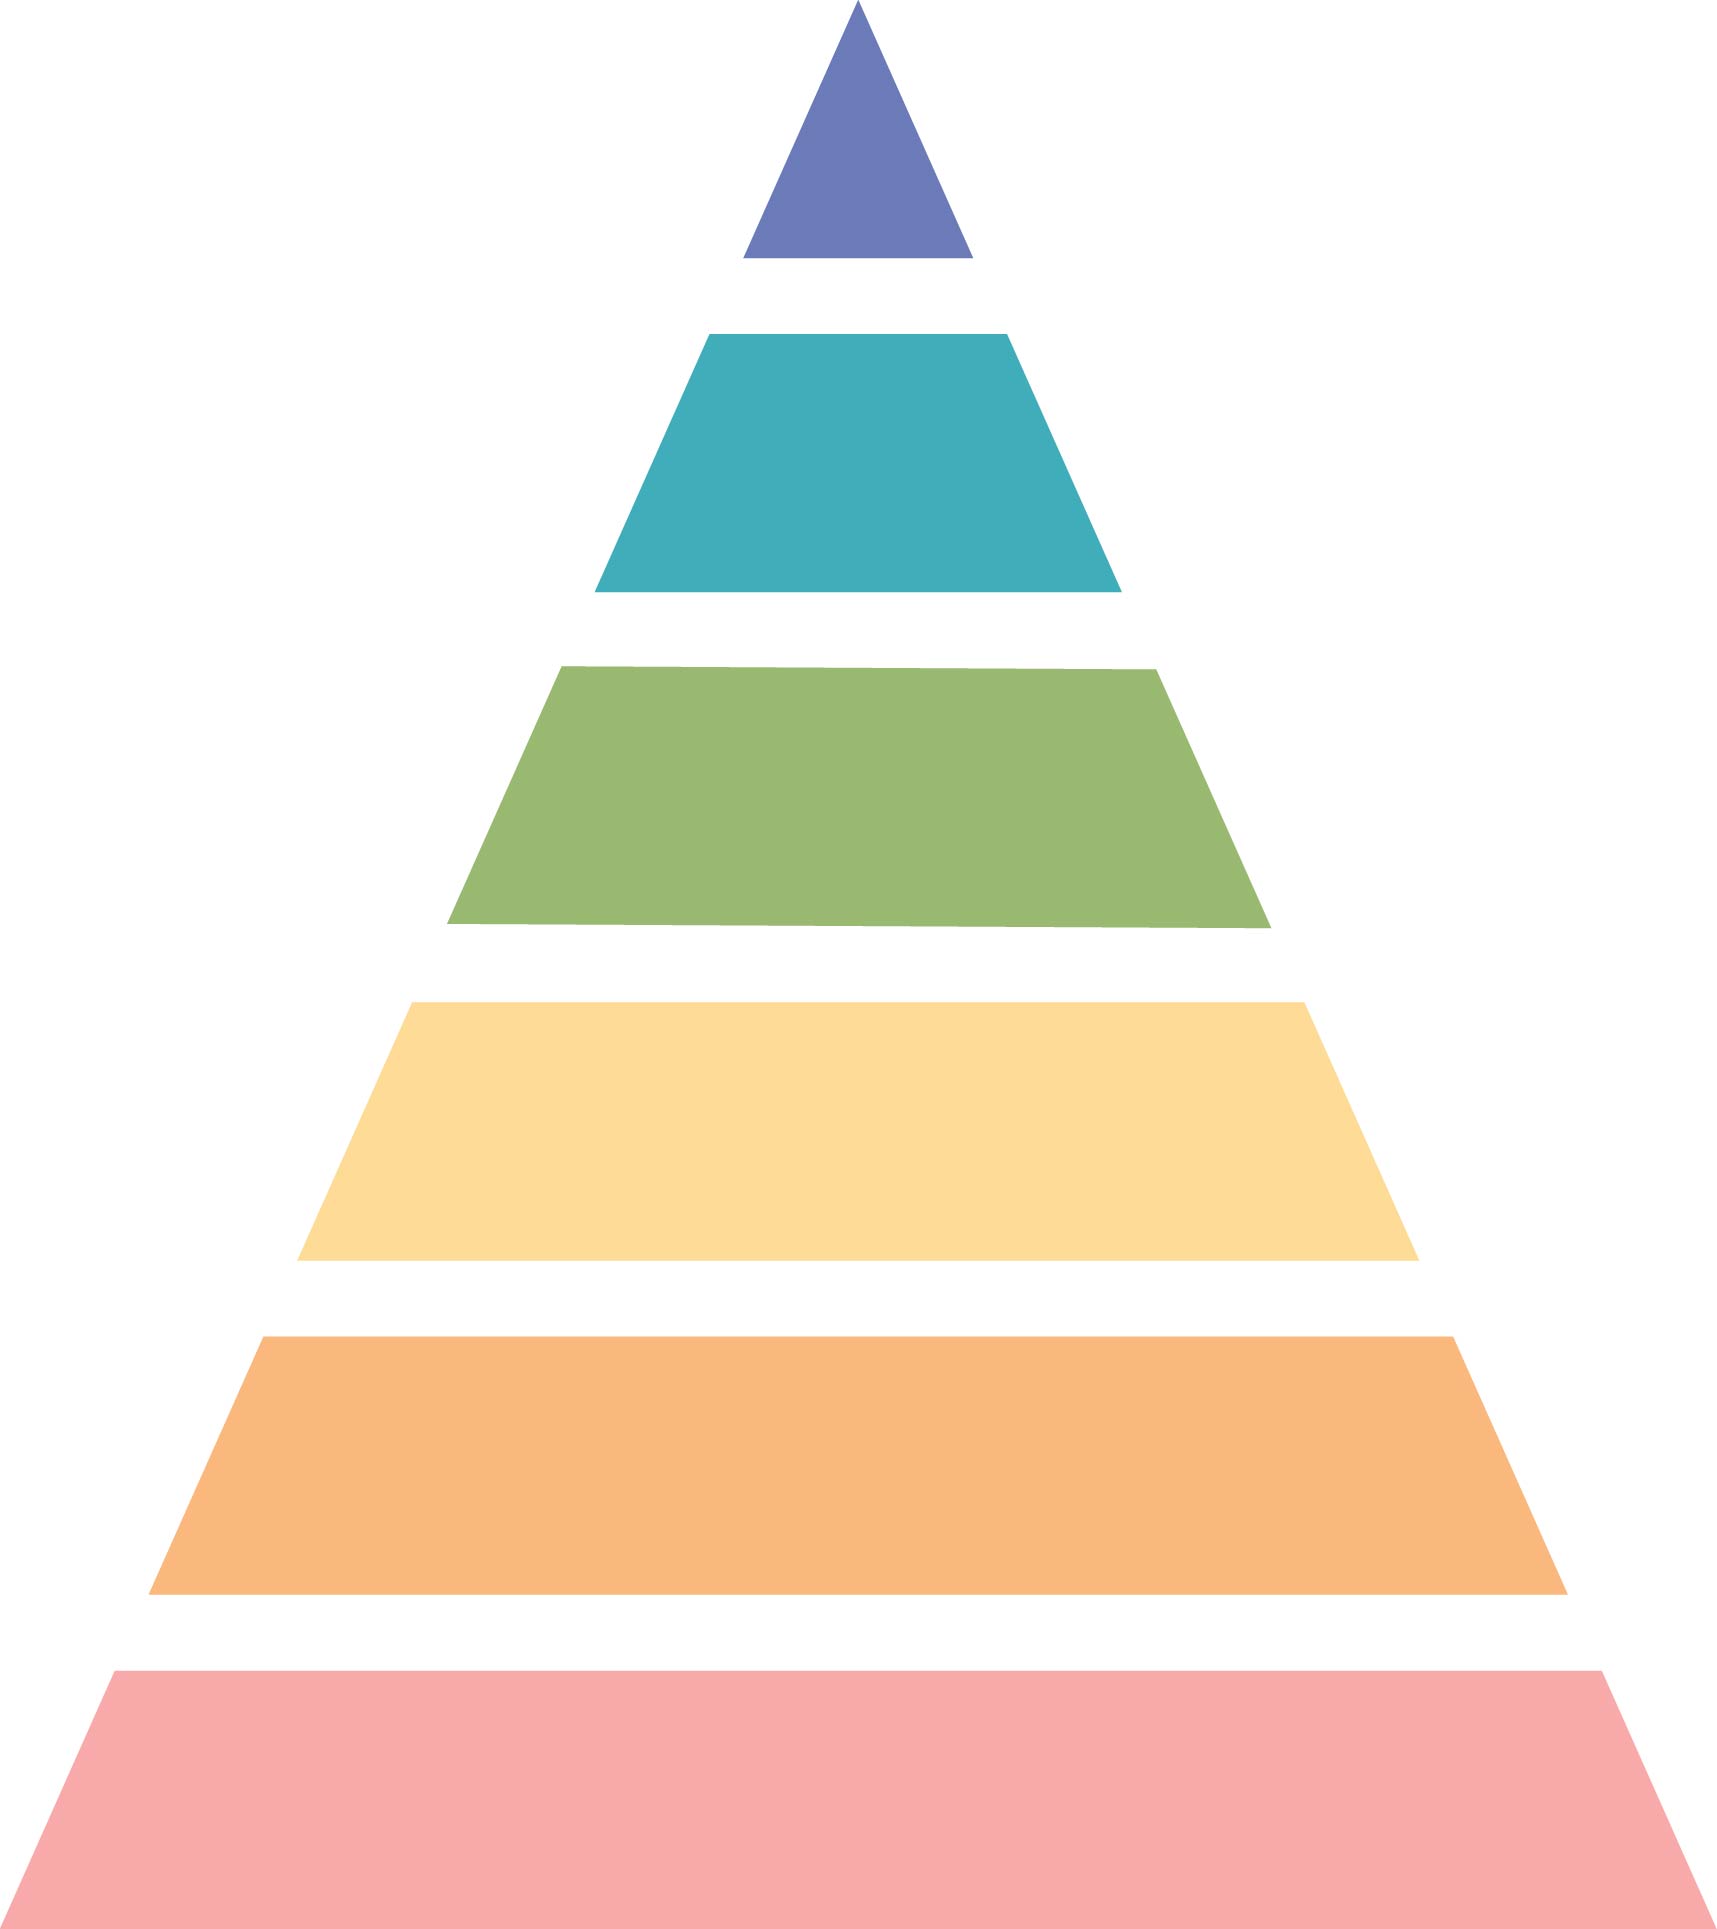 The pyramid of Maslow’s hierarchy of needs. There are six levels that get narrower from bottom to top.